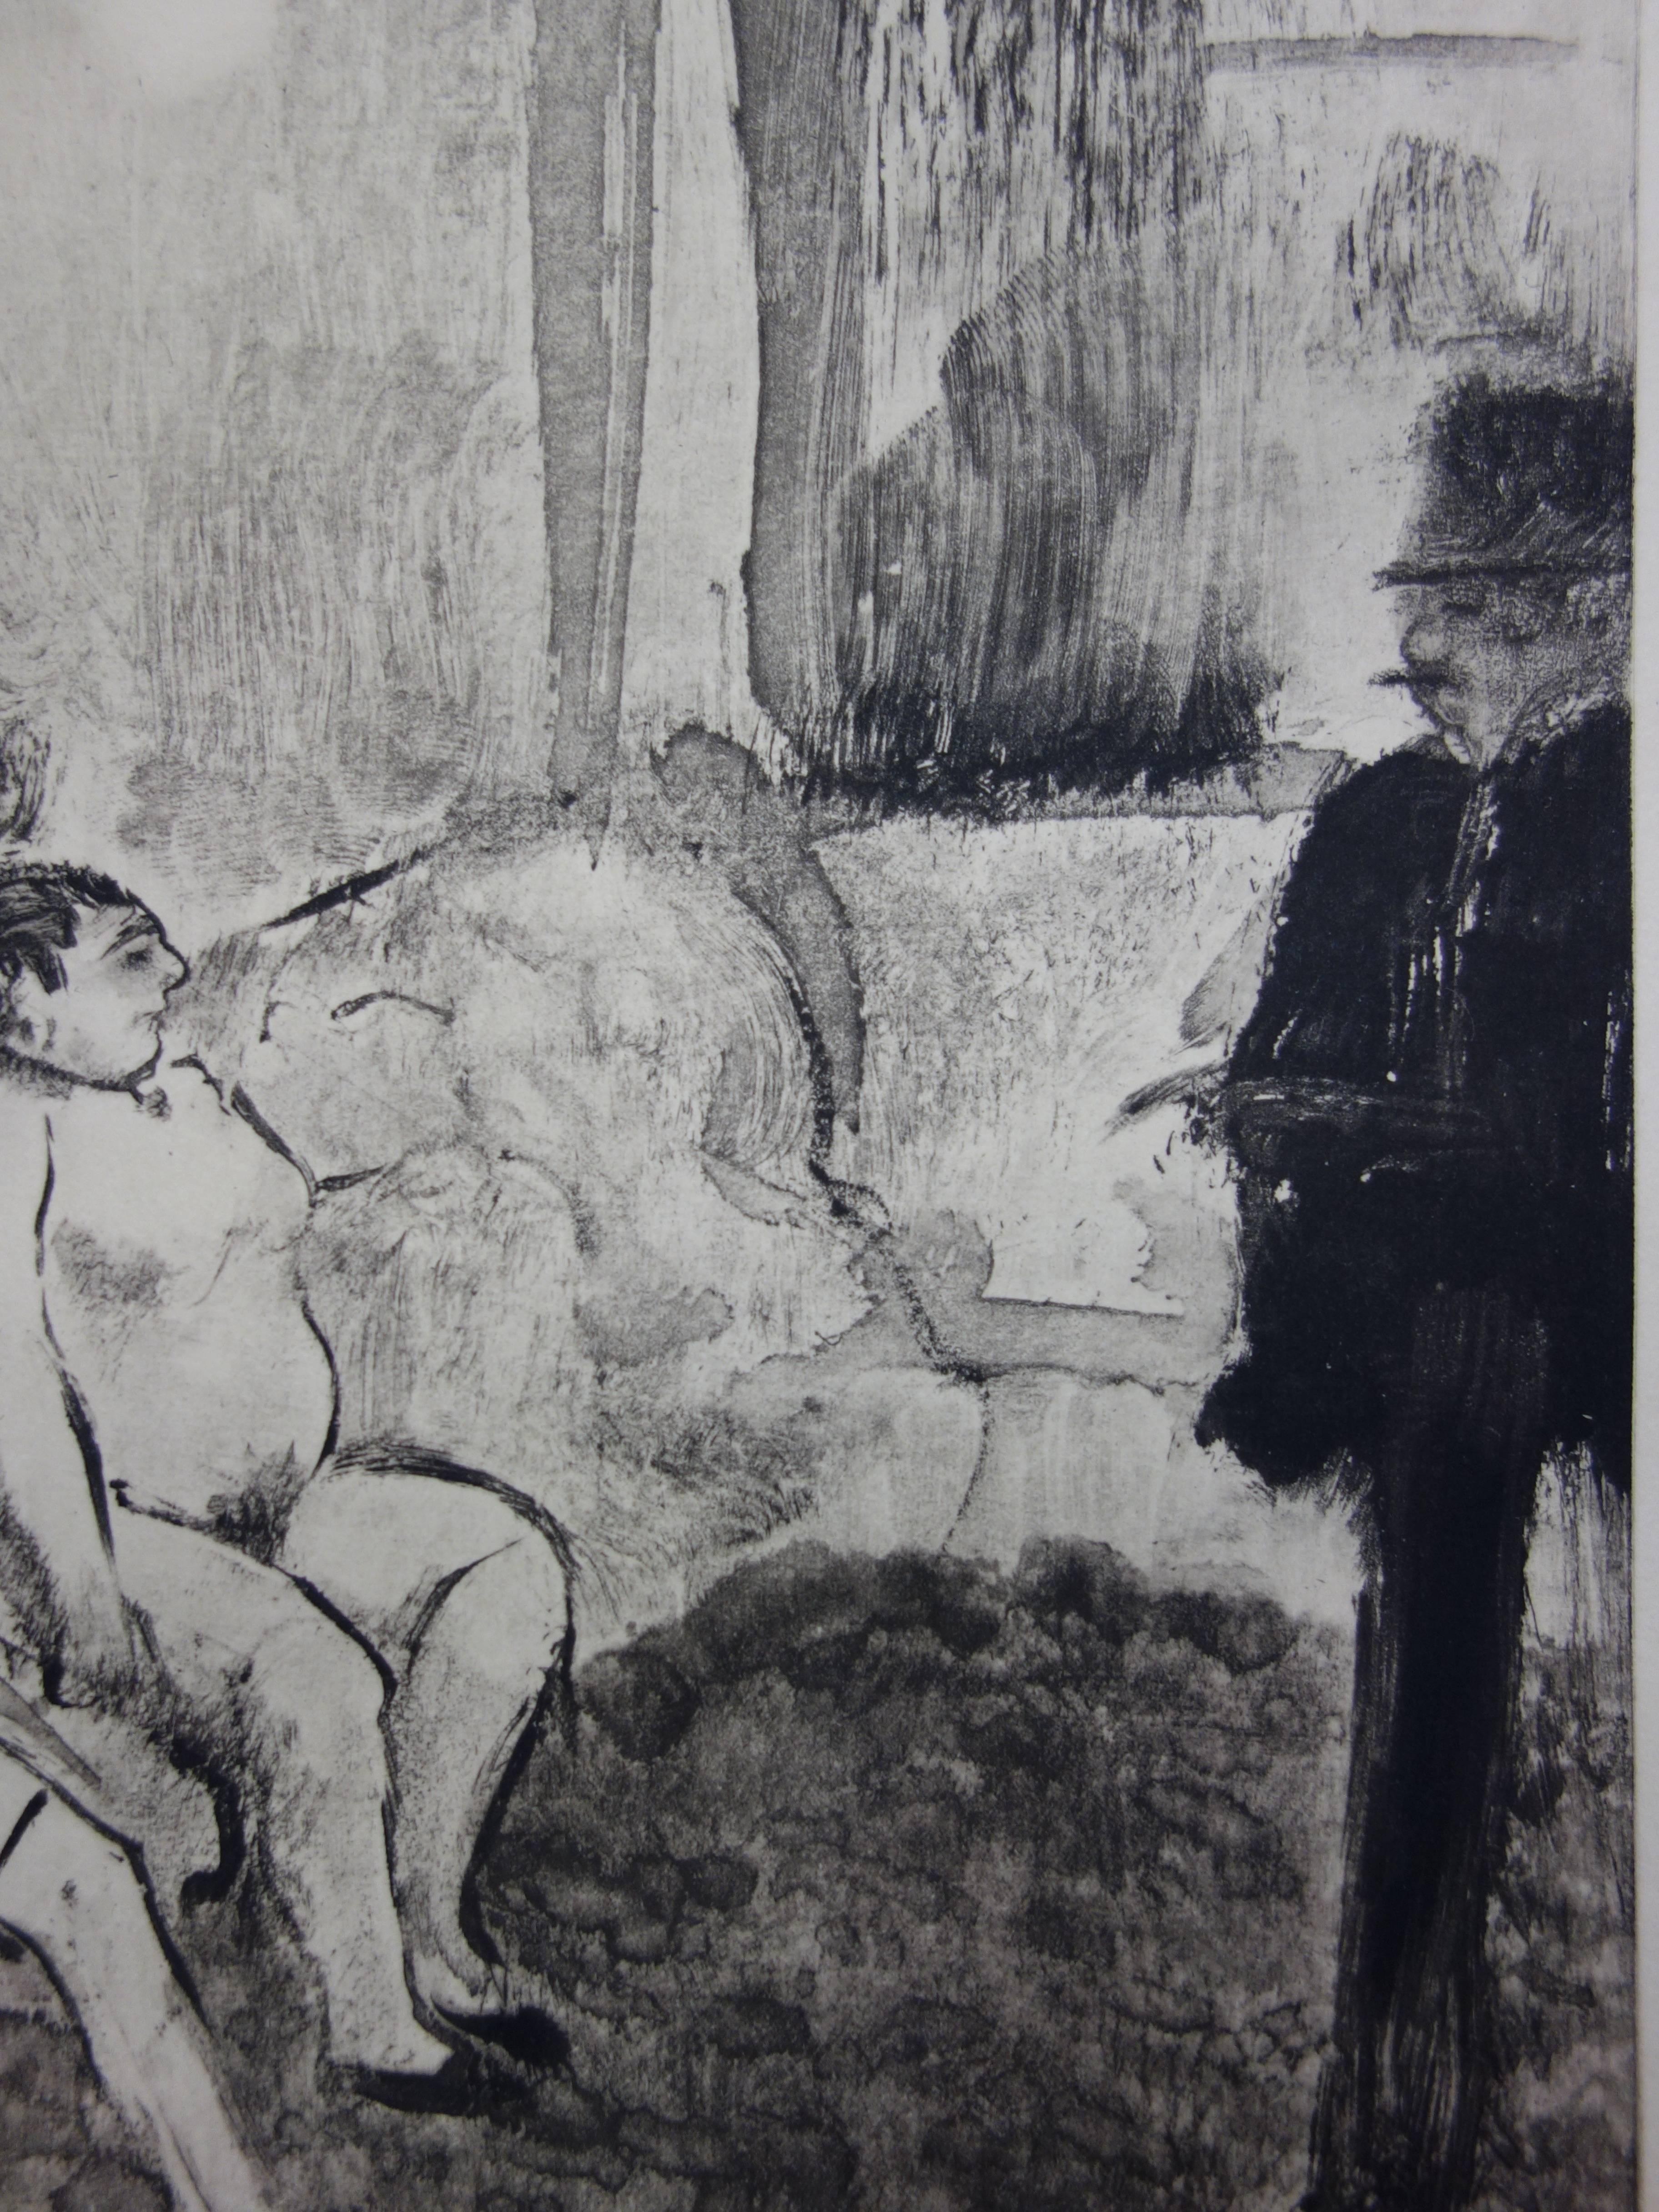 Edgar DEGAS (after)
Two Women : a Delicate Choice 

Original etching and aquatint
On Rives vellum 25 x 32 cm (c. 10 x 13 inch)
In the early 1920s, Ambroise Vollard (the great art seller, editor of Picasso (Suite Vollard), Cezanne, Renoir or Georges